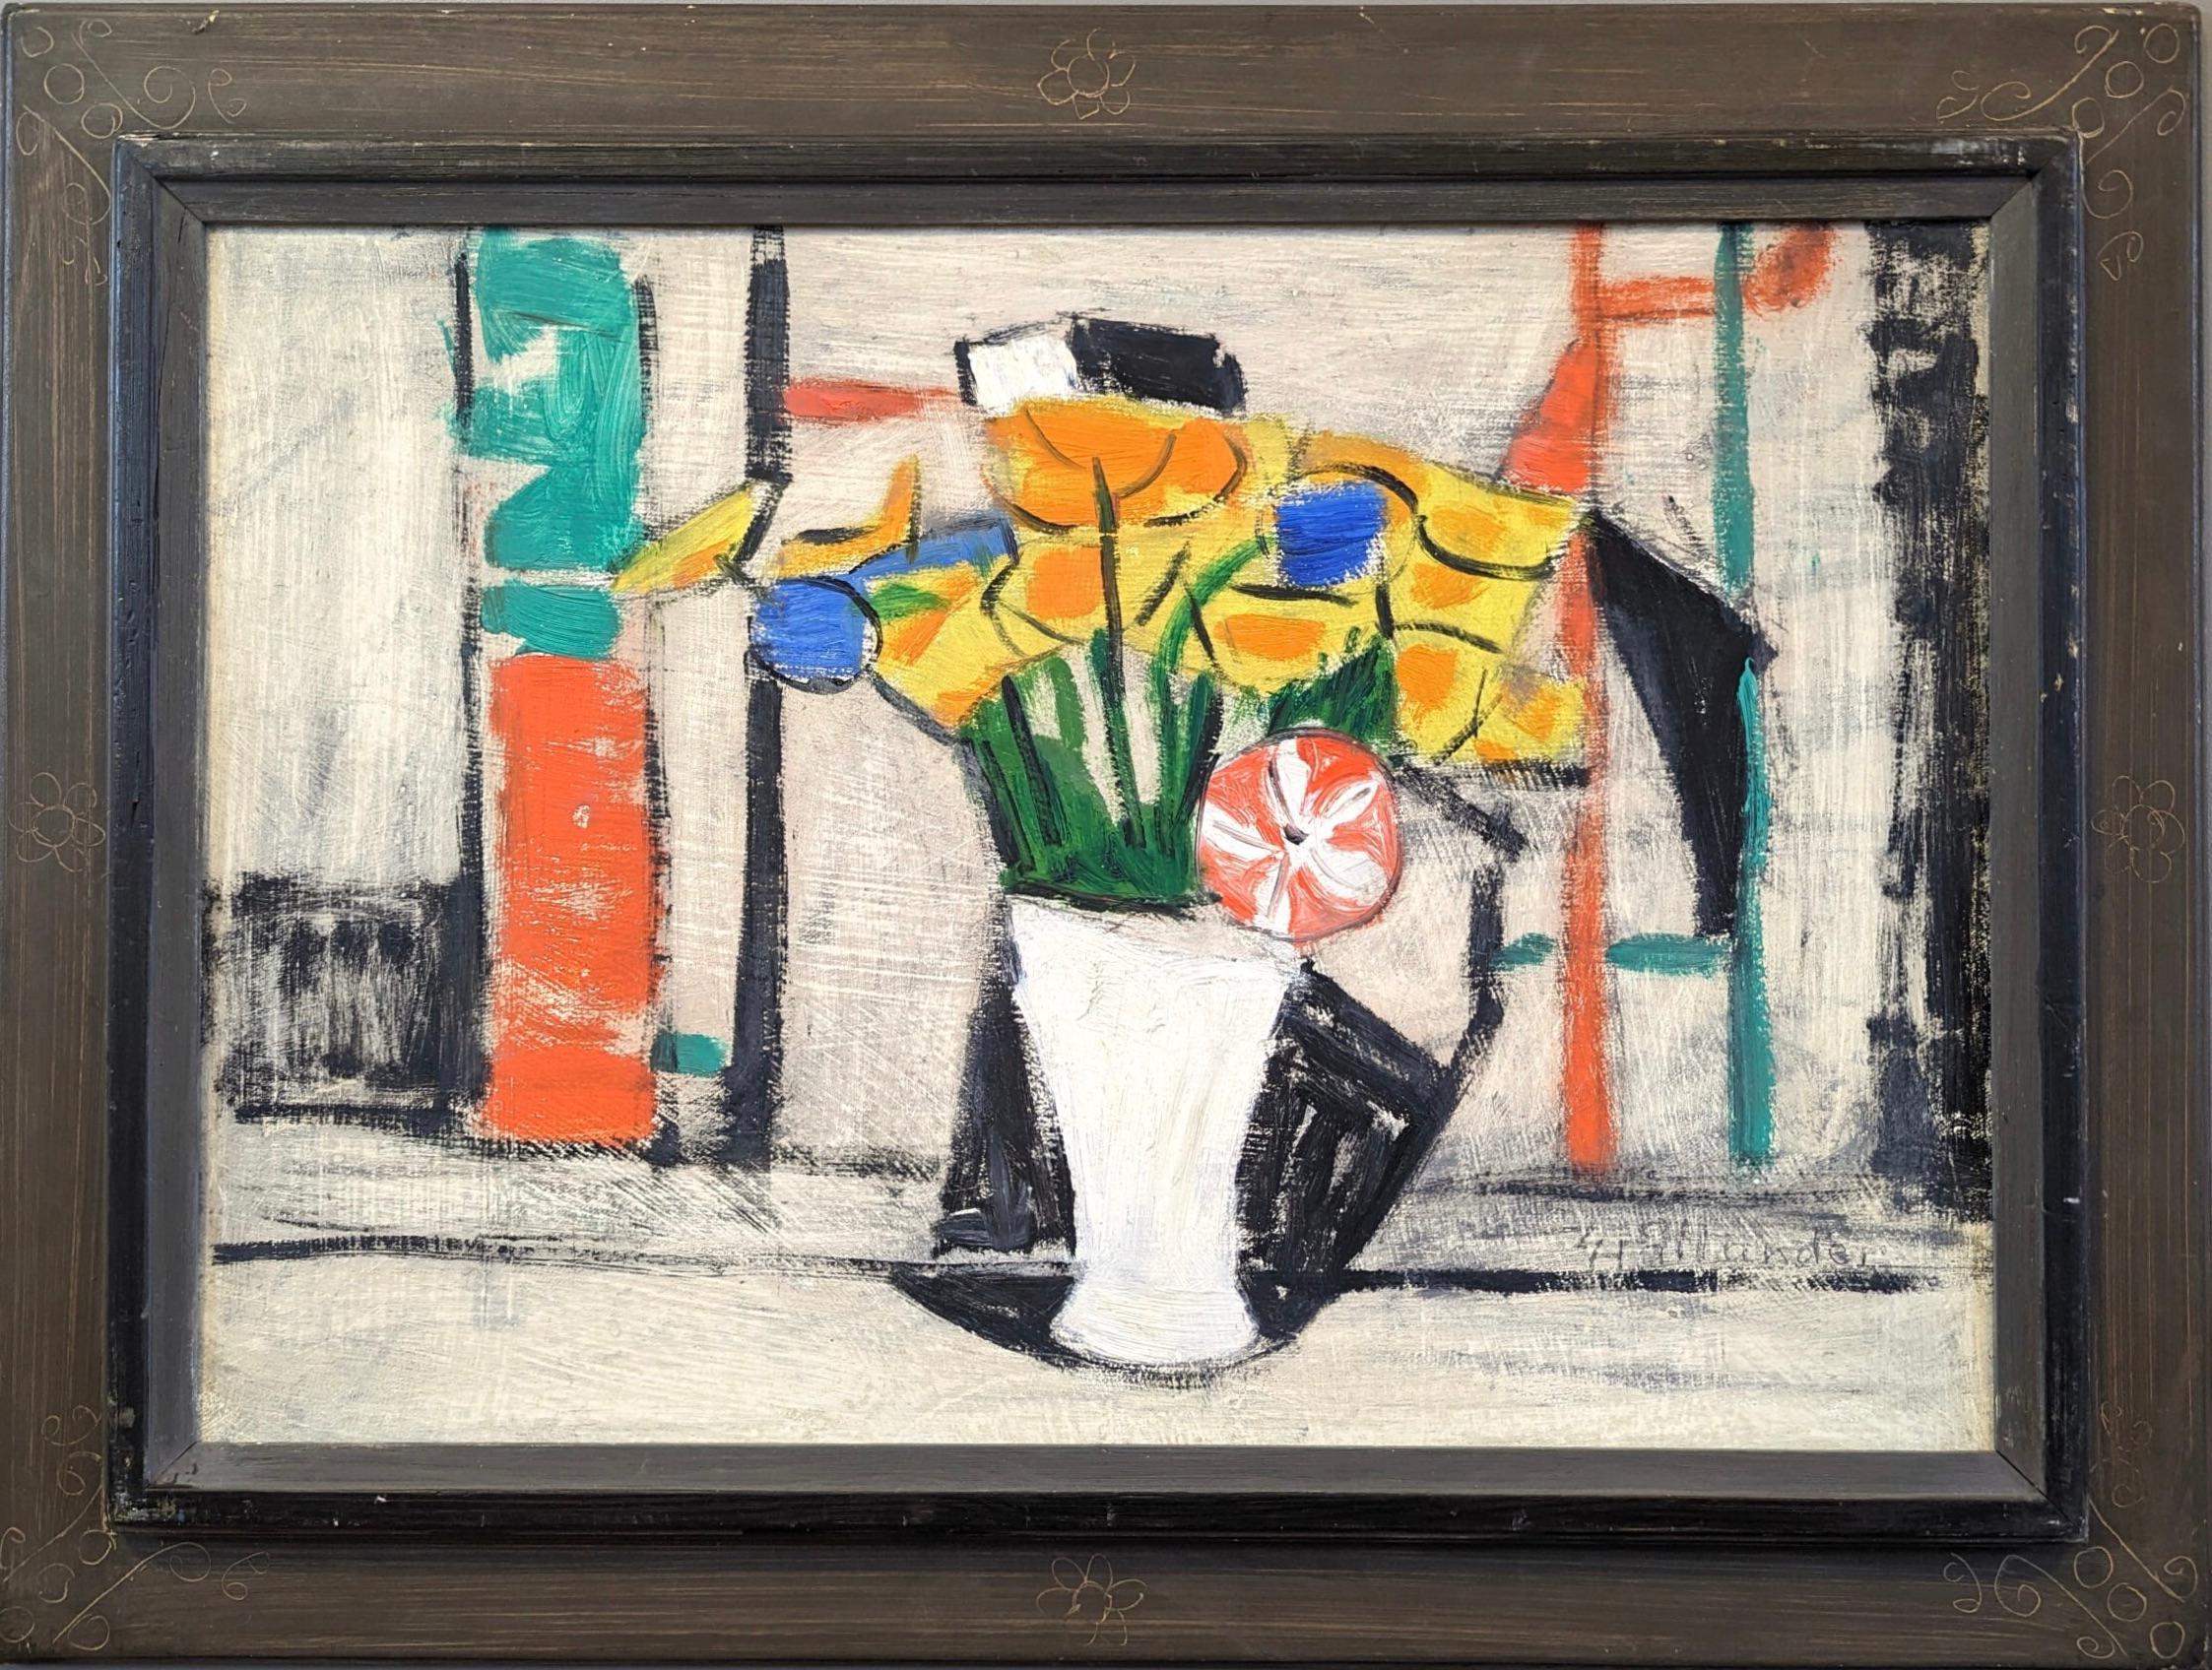 Unknown Still-Life Painting – 1964 Vintage Mid-Century Modern Swedish Still Life Oil Painting - The Bouquet